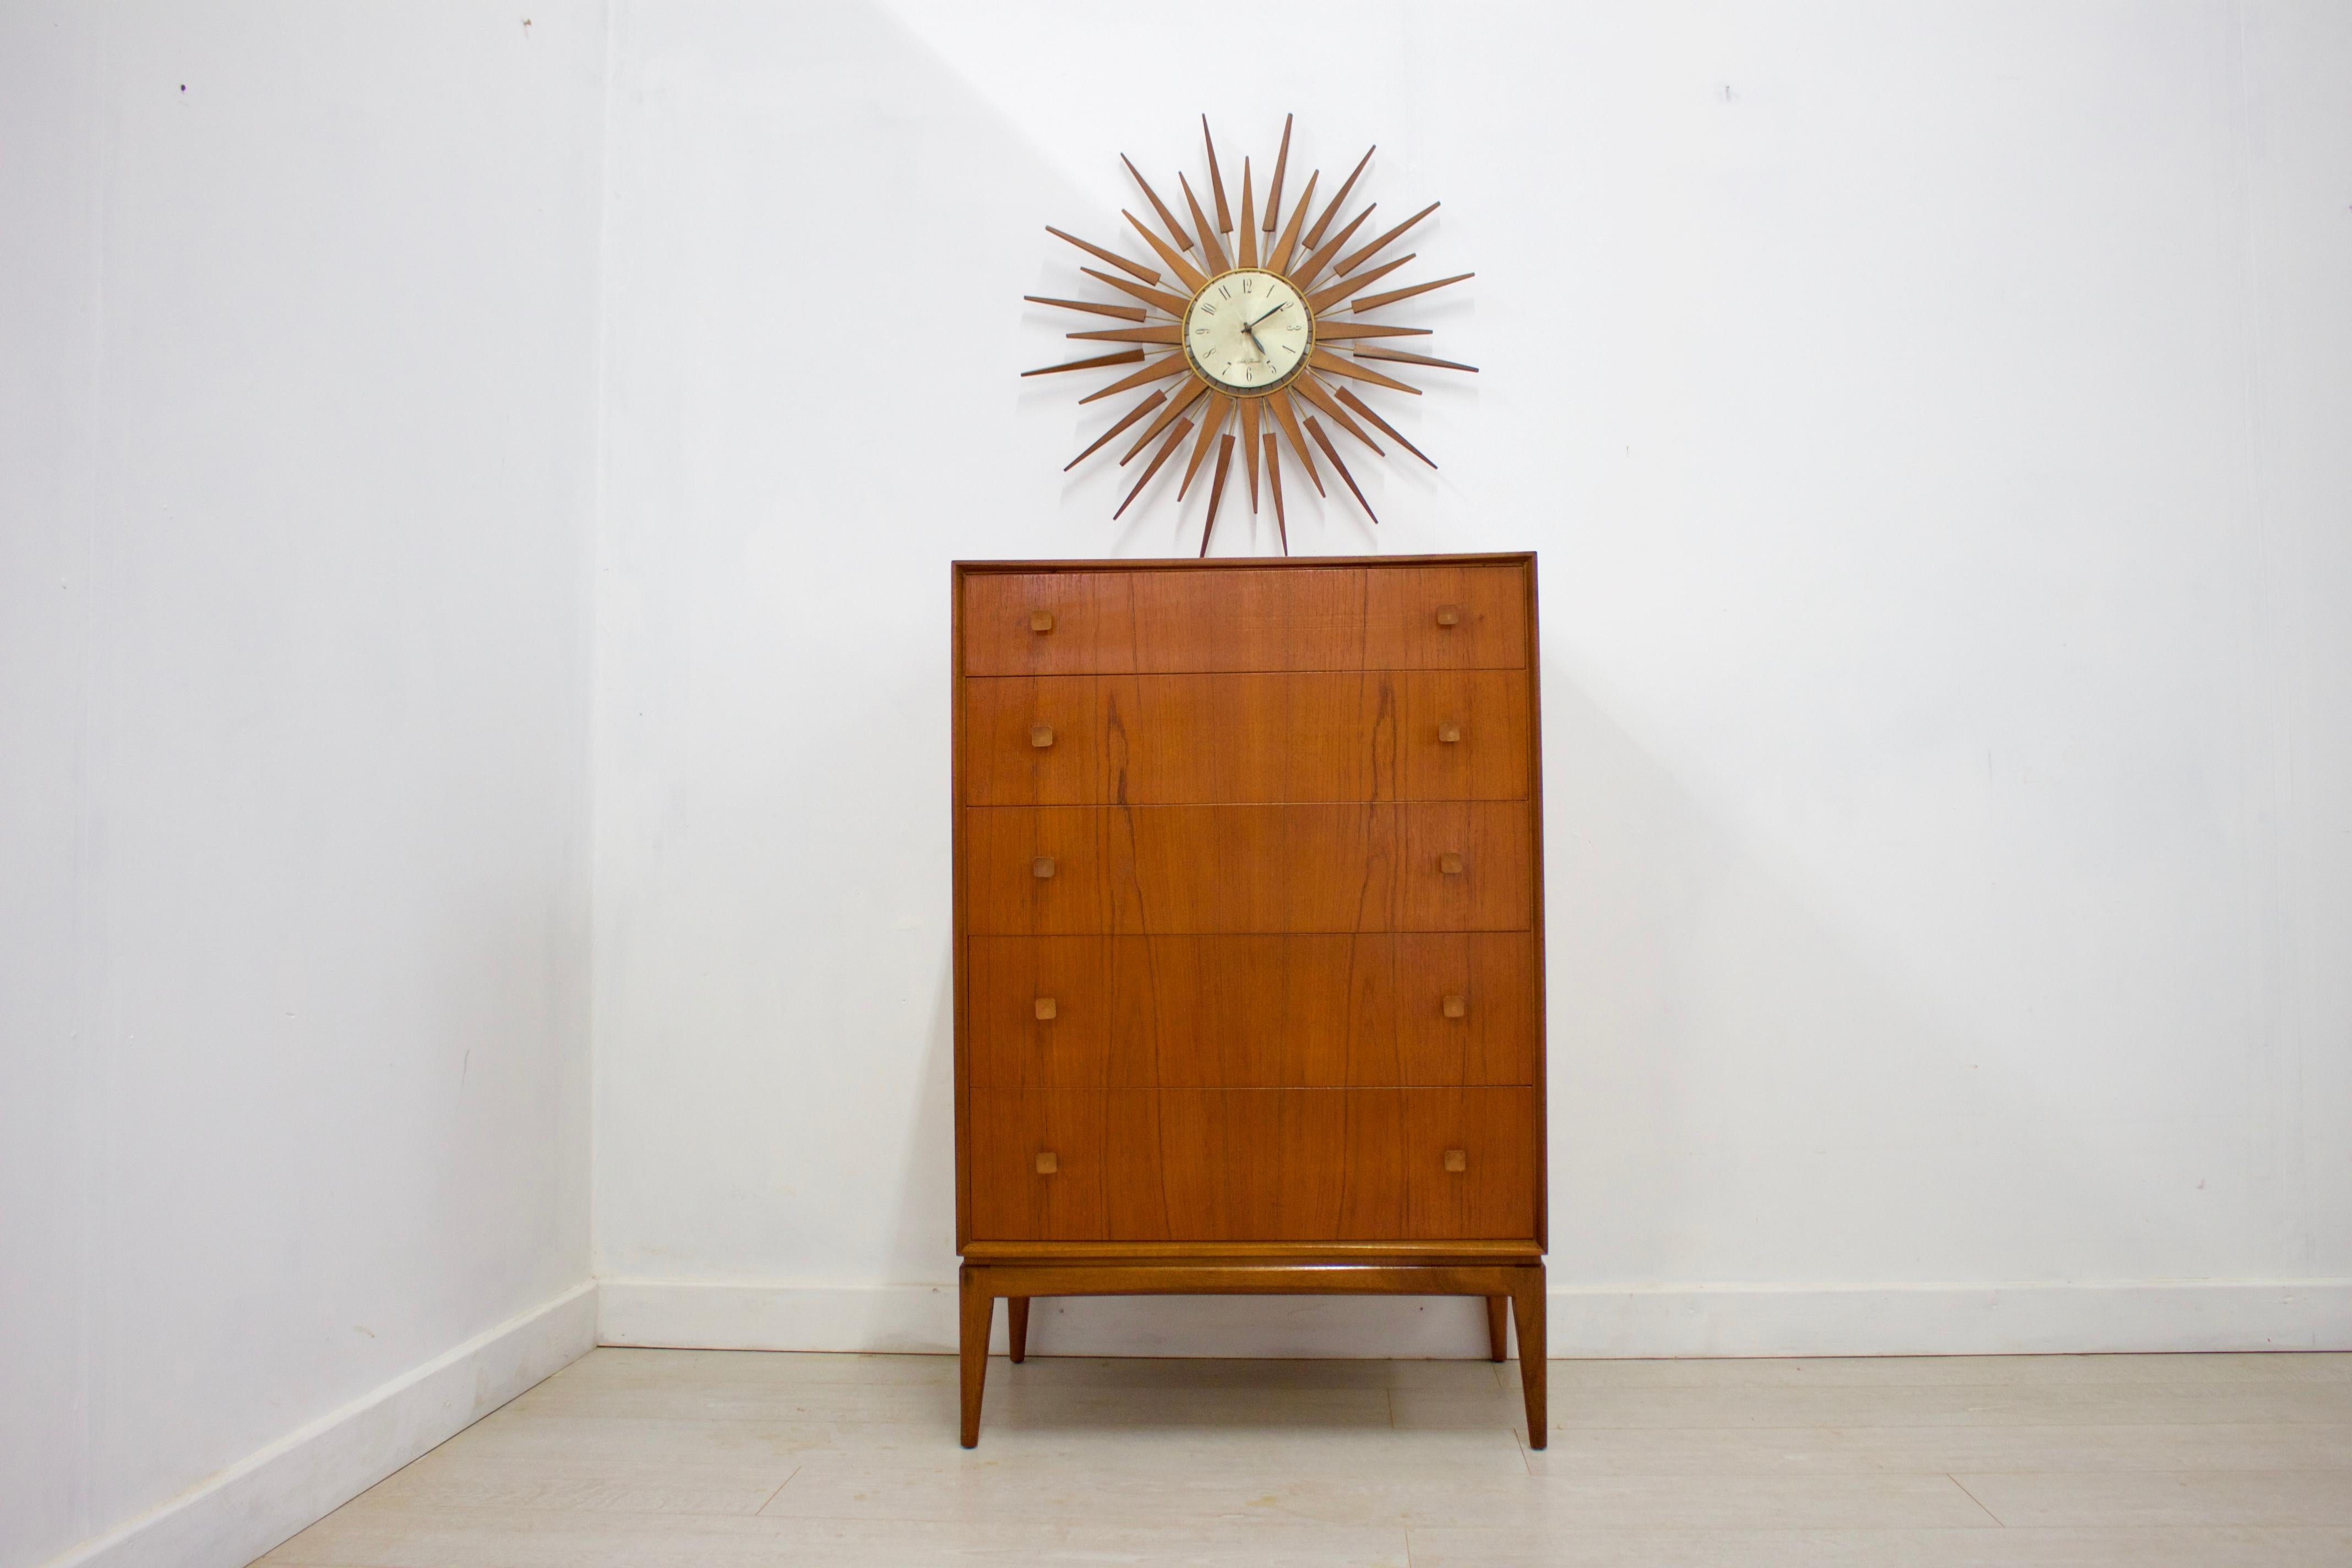 Midcentury design
- midcentury chest of drawers
- Manufactured in the UK by McIntosh
- Made from teak and teak veneer.